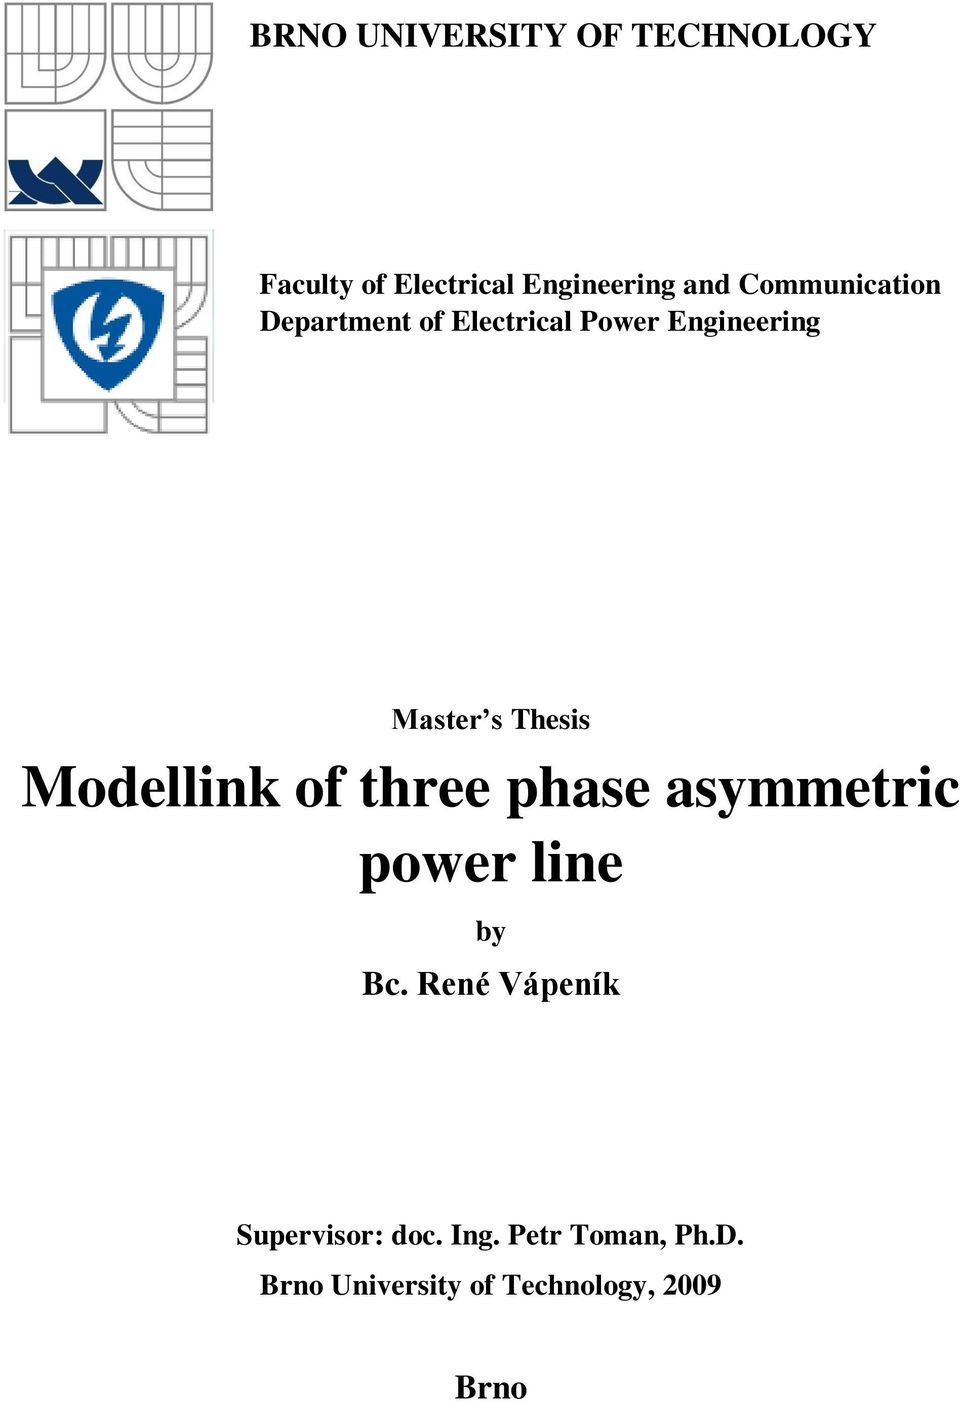 Thesis Modellink of three phase asymmetric power line by c.